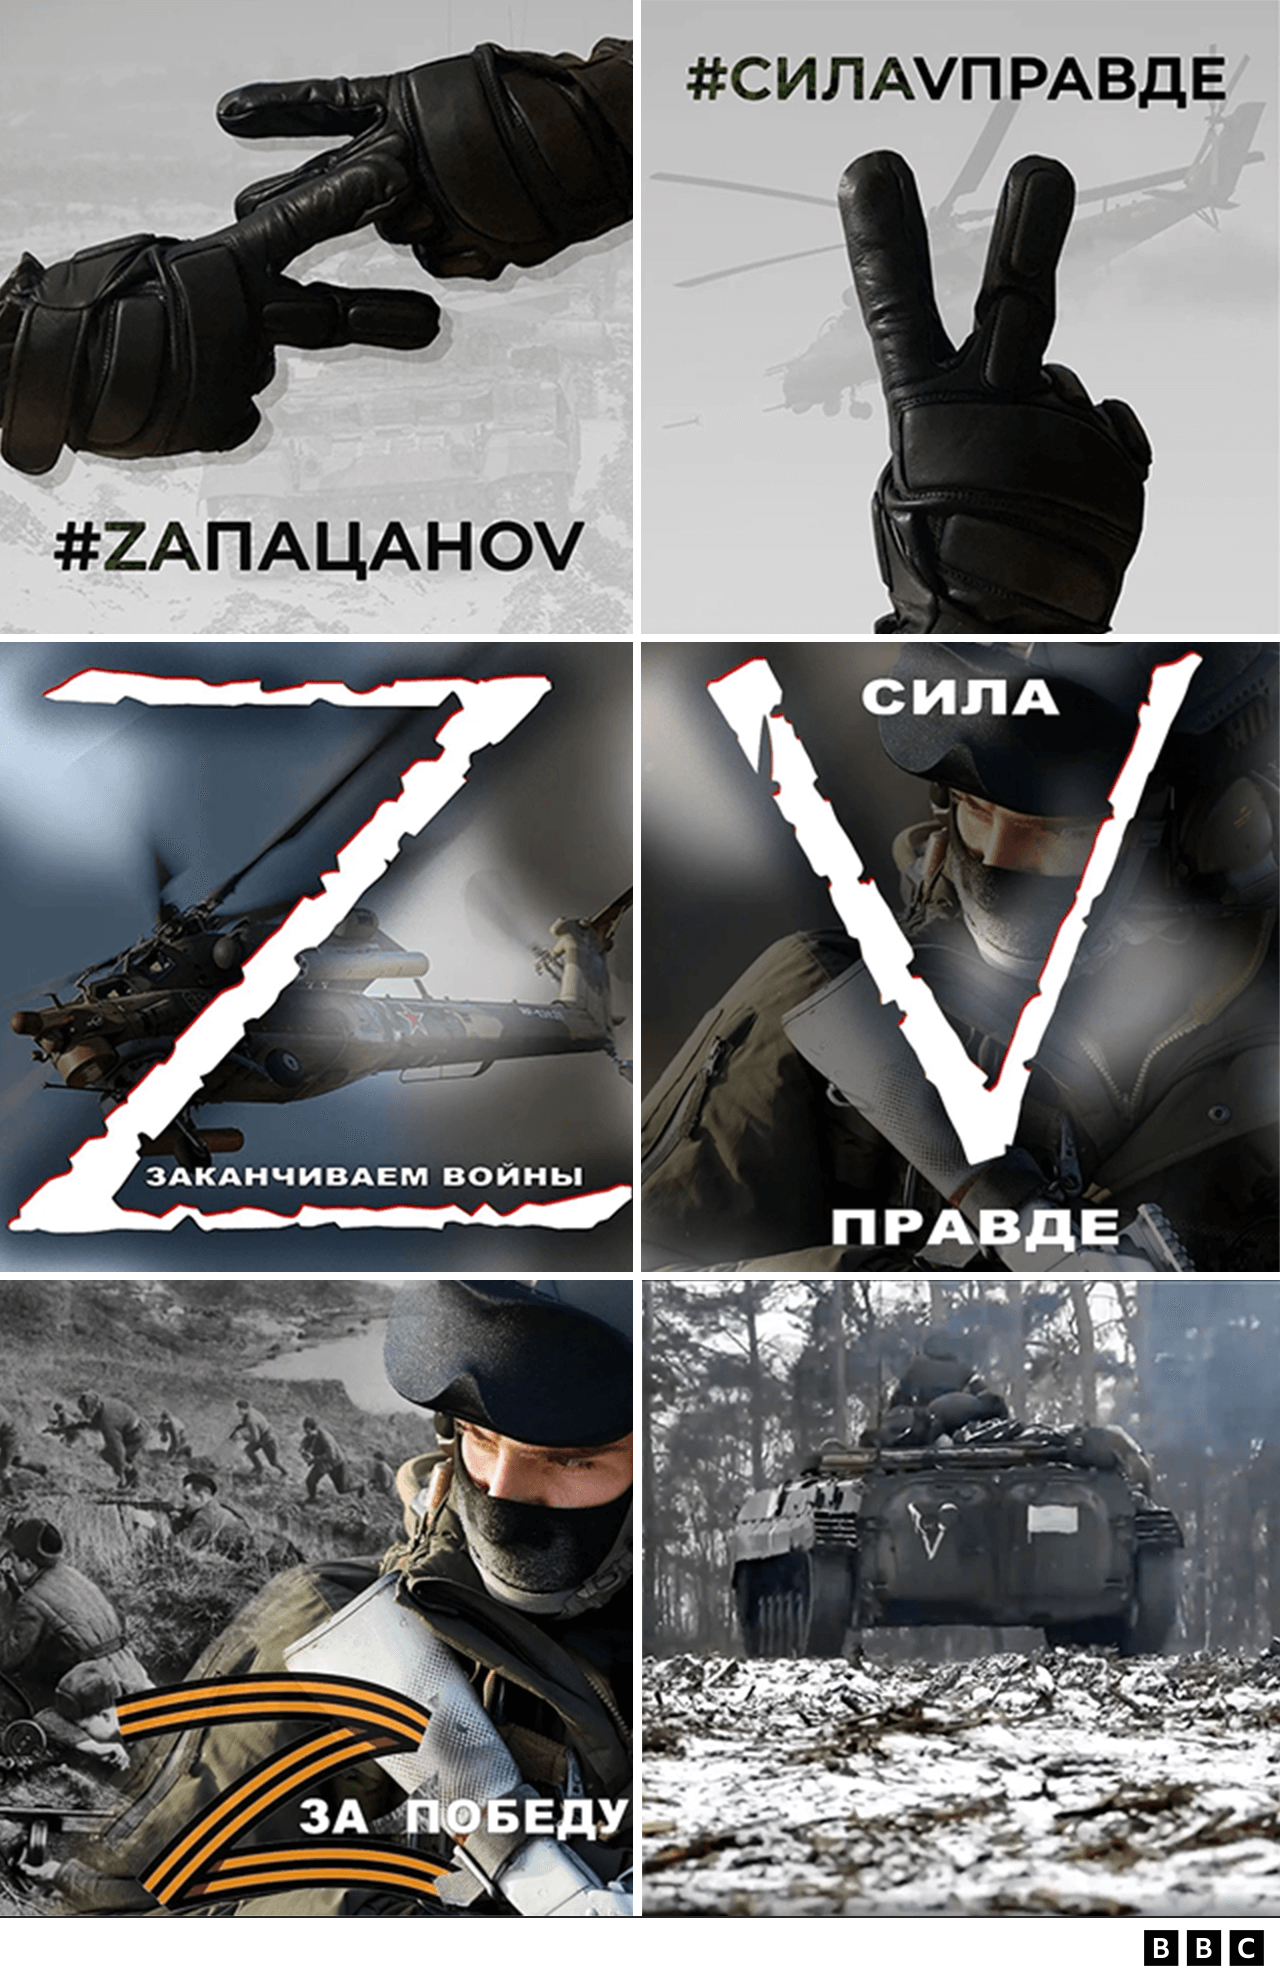 Instagram images of "Zs" and "Vs" from the Russian defence ministry